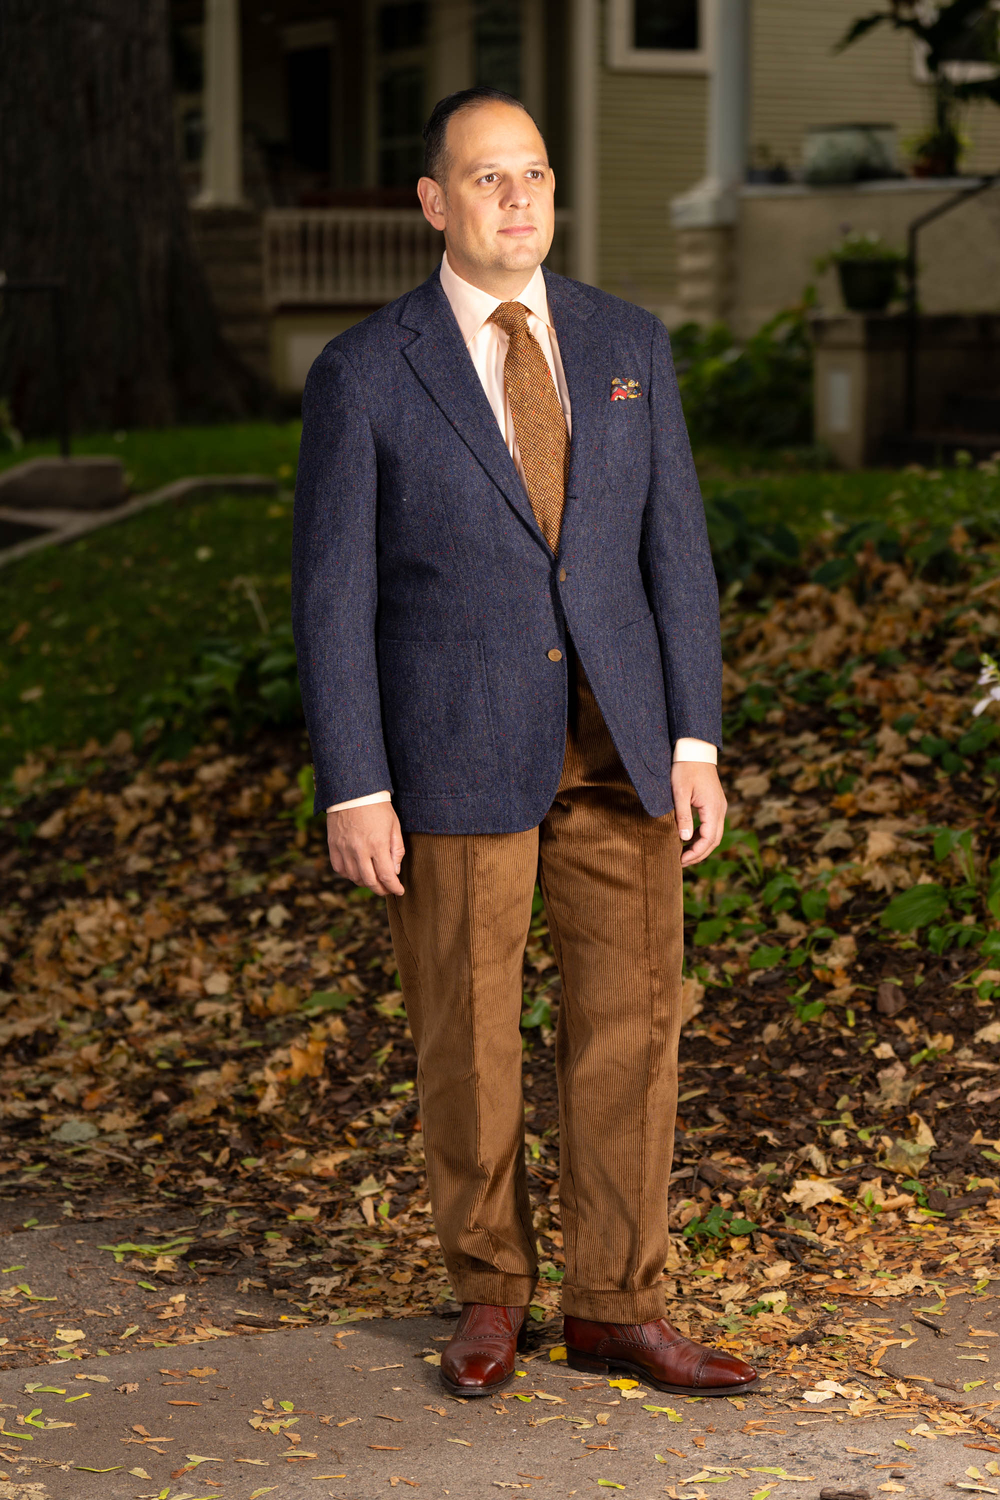 Raphael in Stancliffe Corduroy in Cognac and denim colored sportcoat